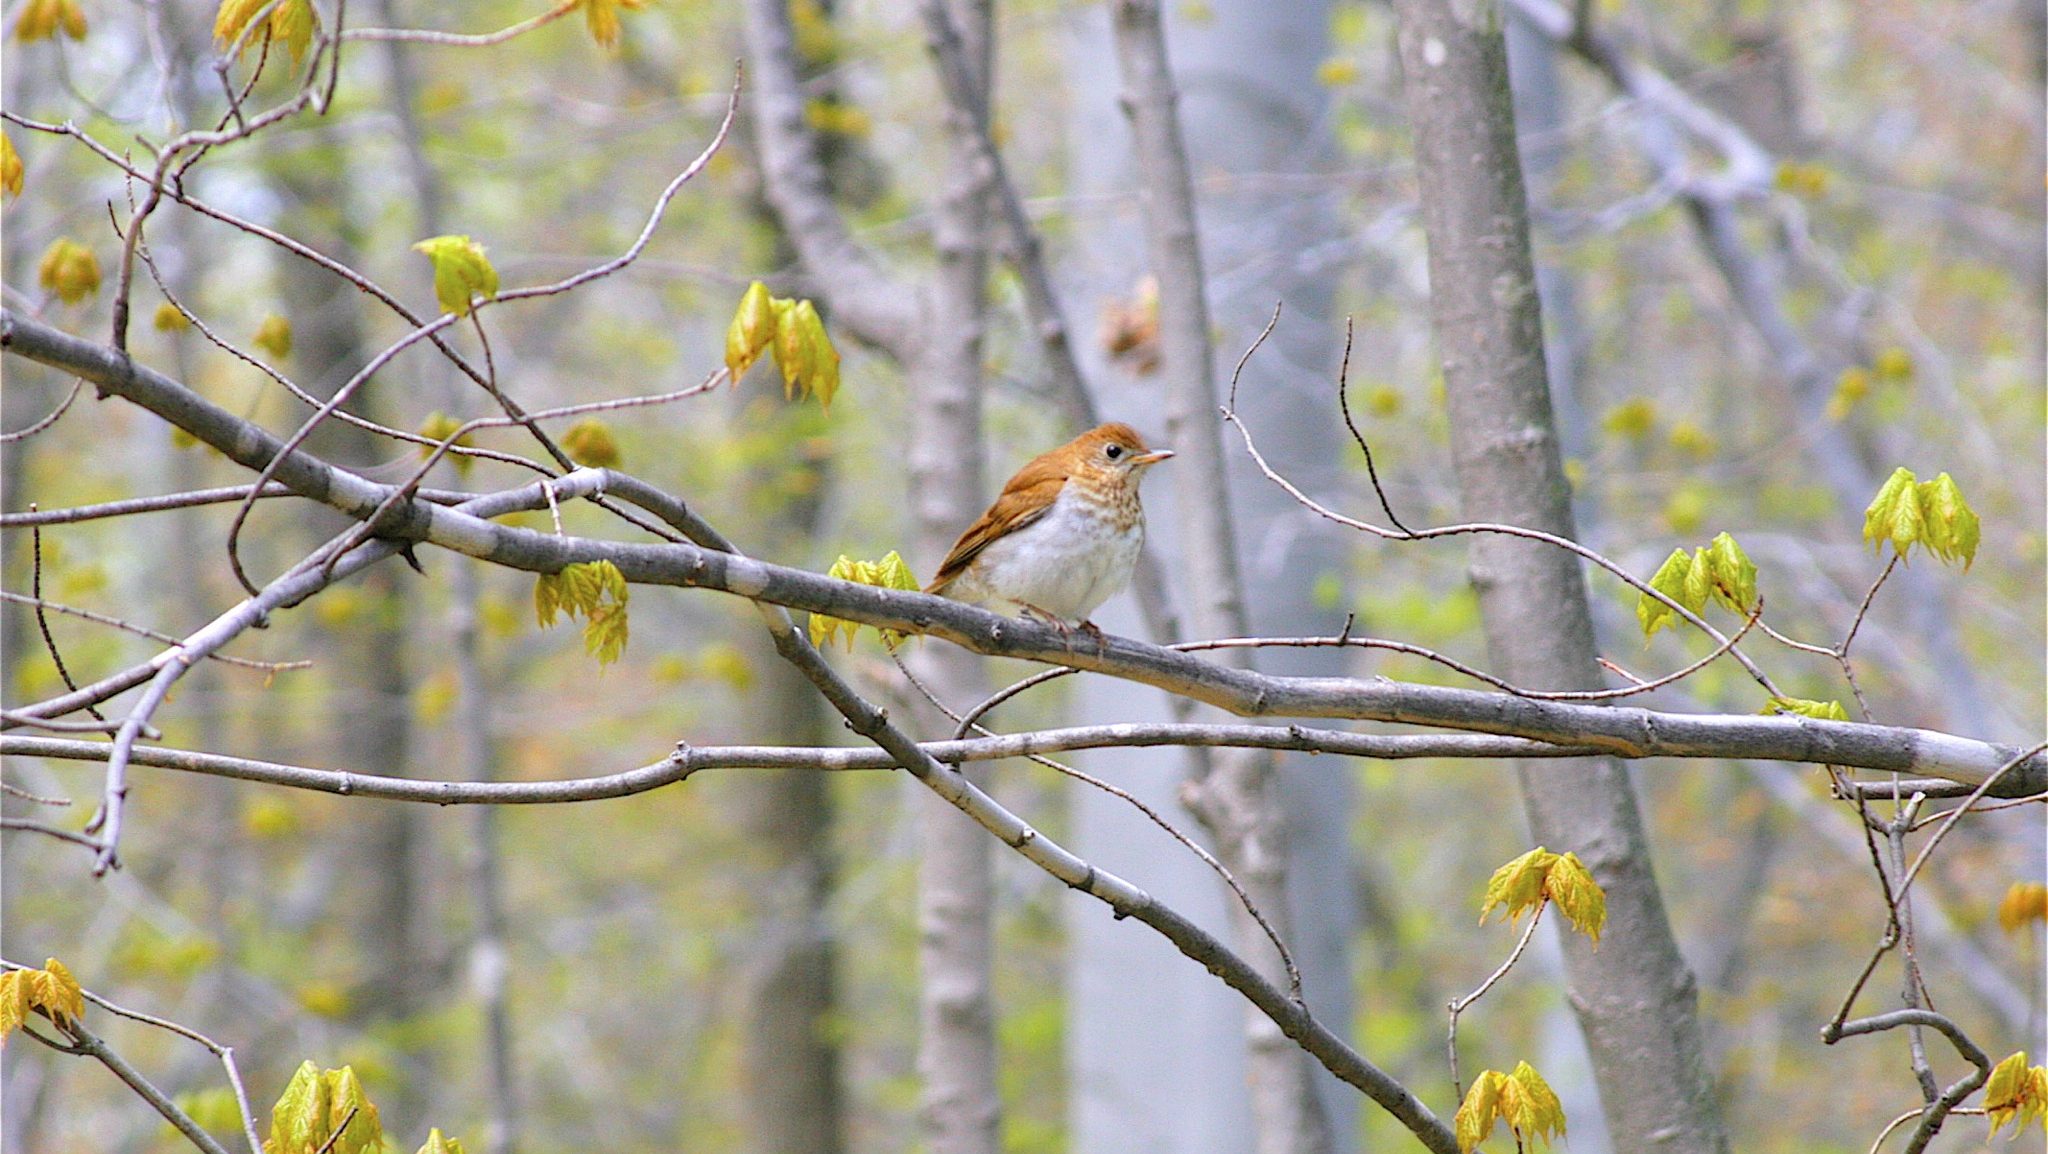 veery perched on a branch with forest visible behind